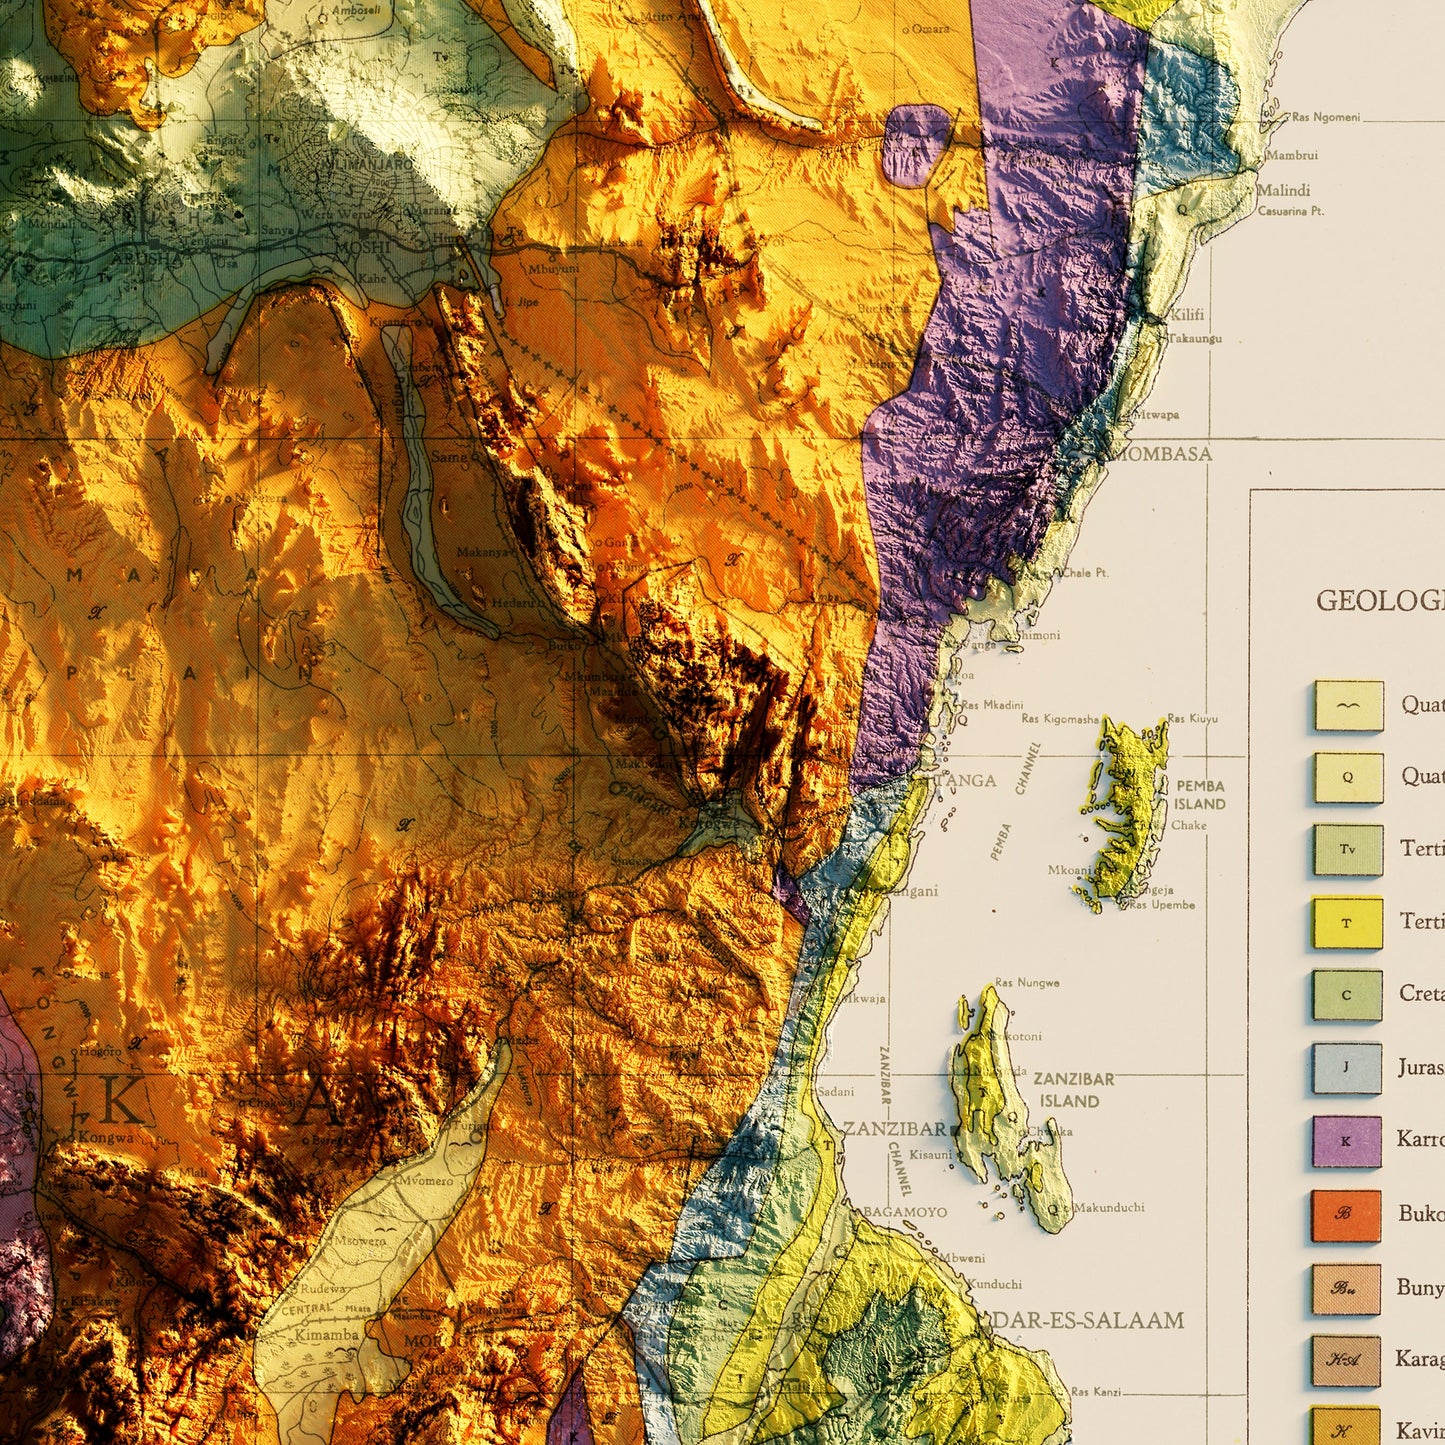 East Africa 1952 Shaded Relief Map